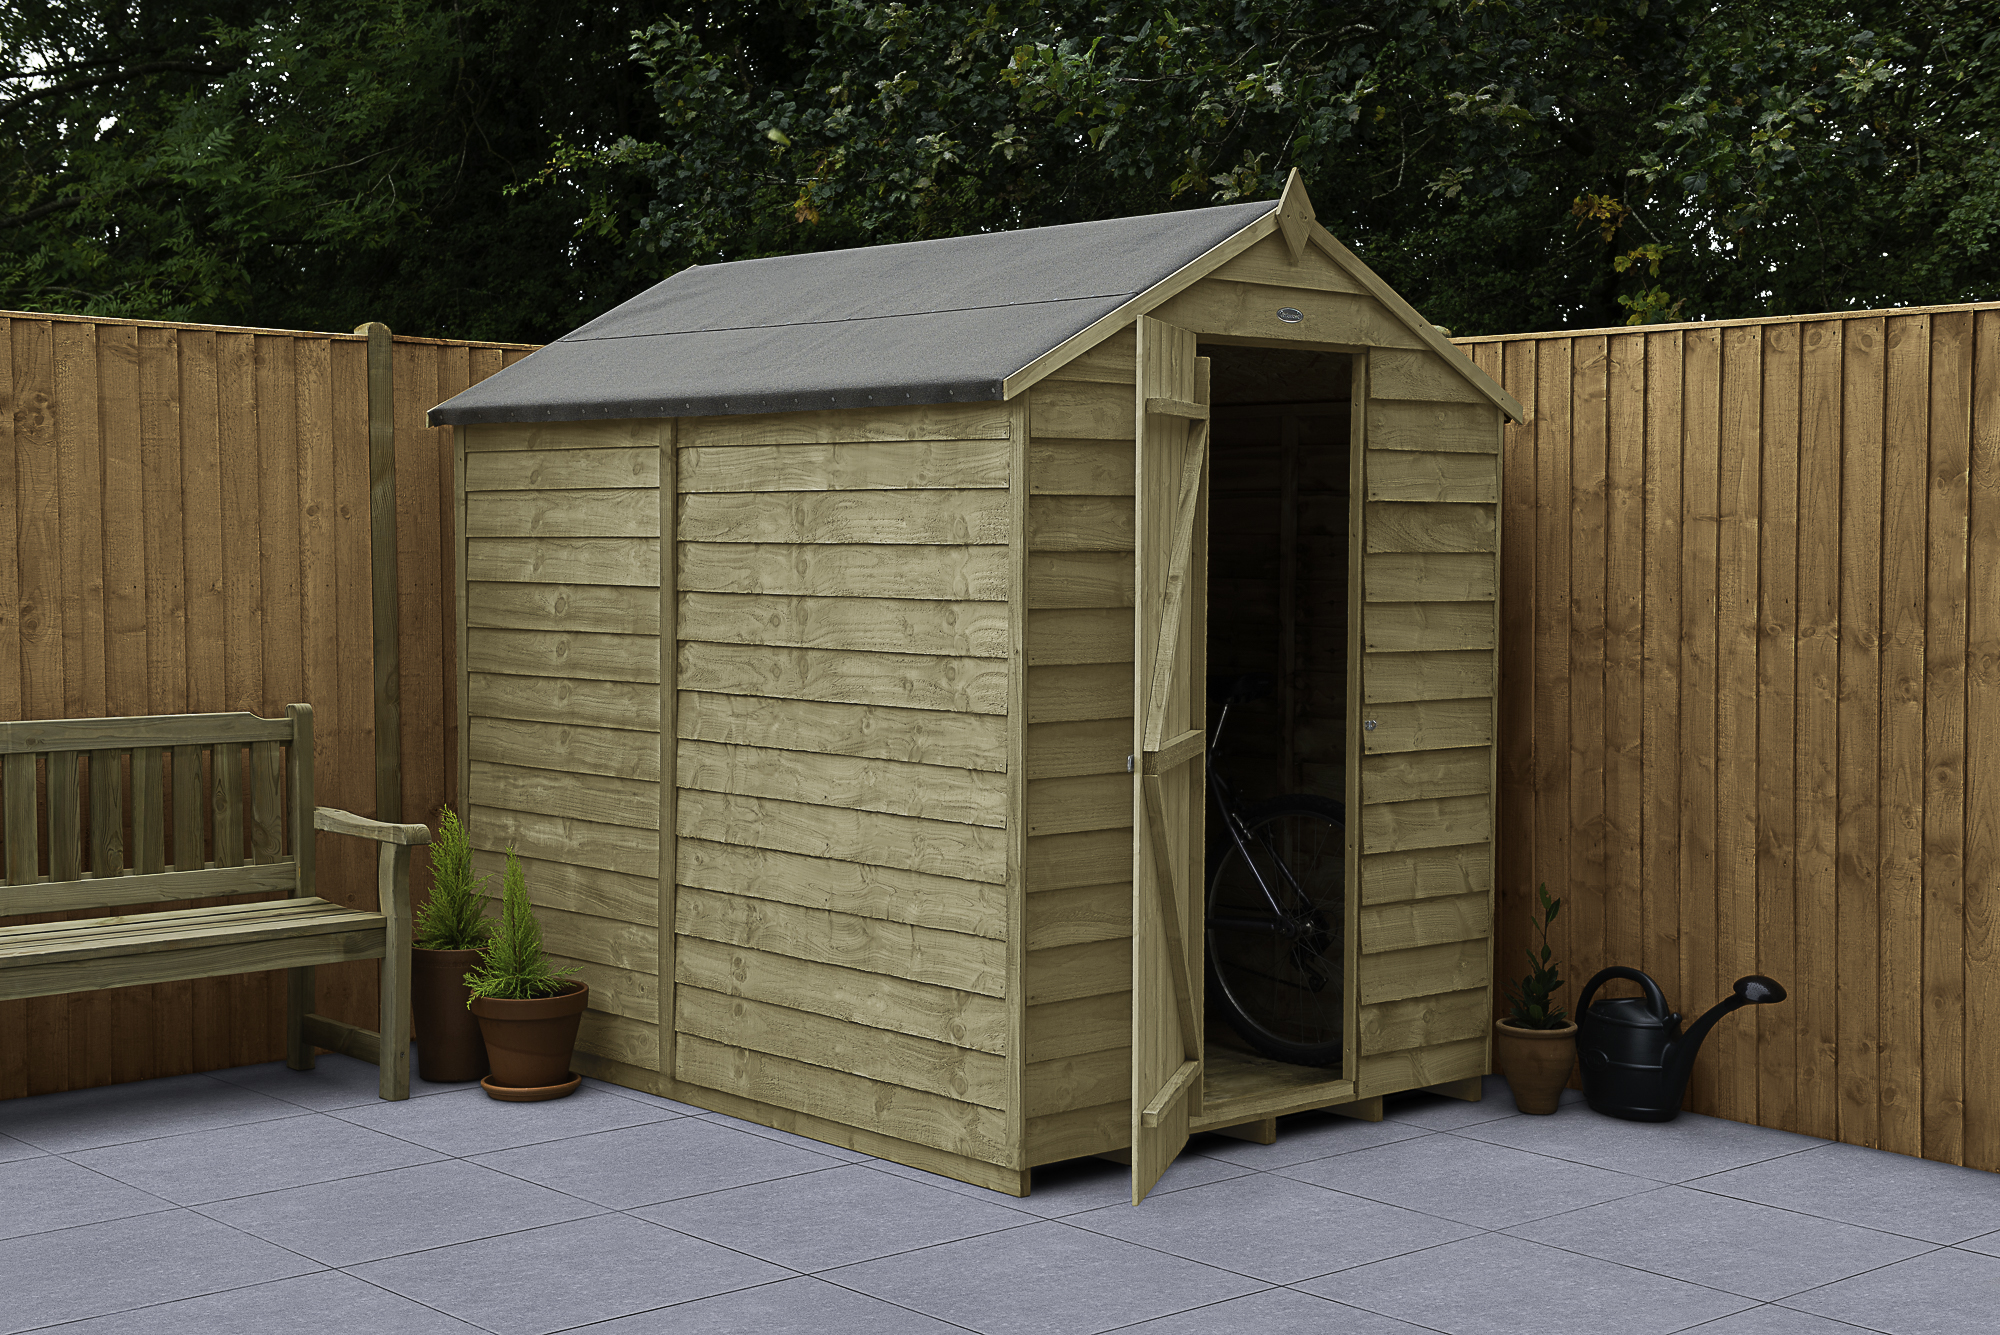 Forest Garden 7 x 5 ft Apex Overlap Pressure Treated Windowless Shed